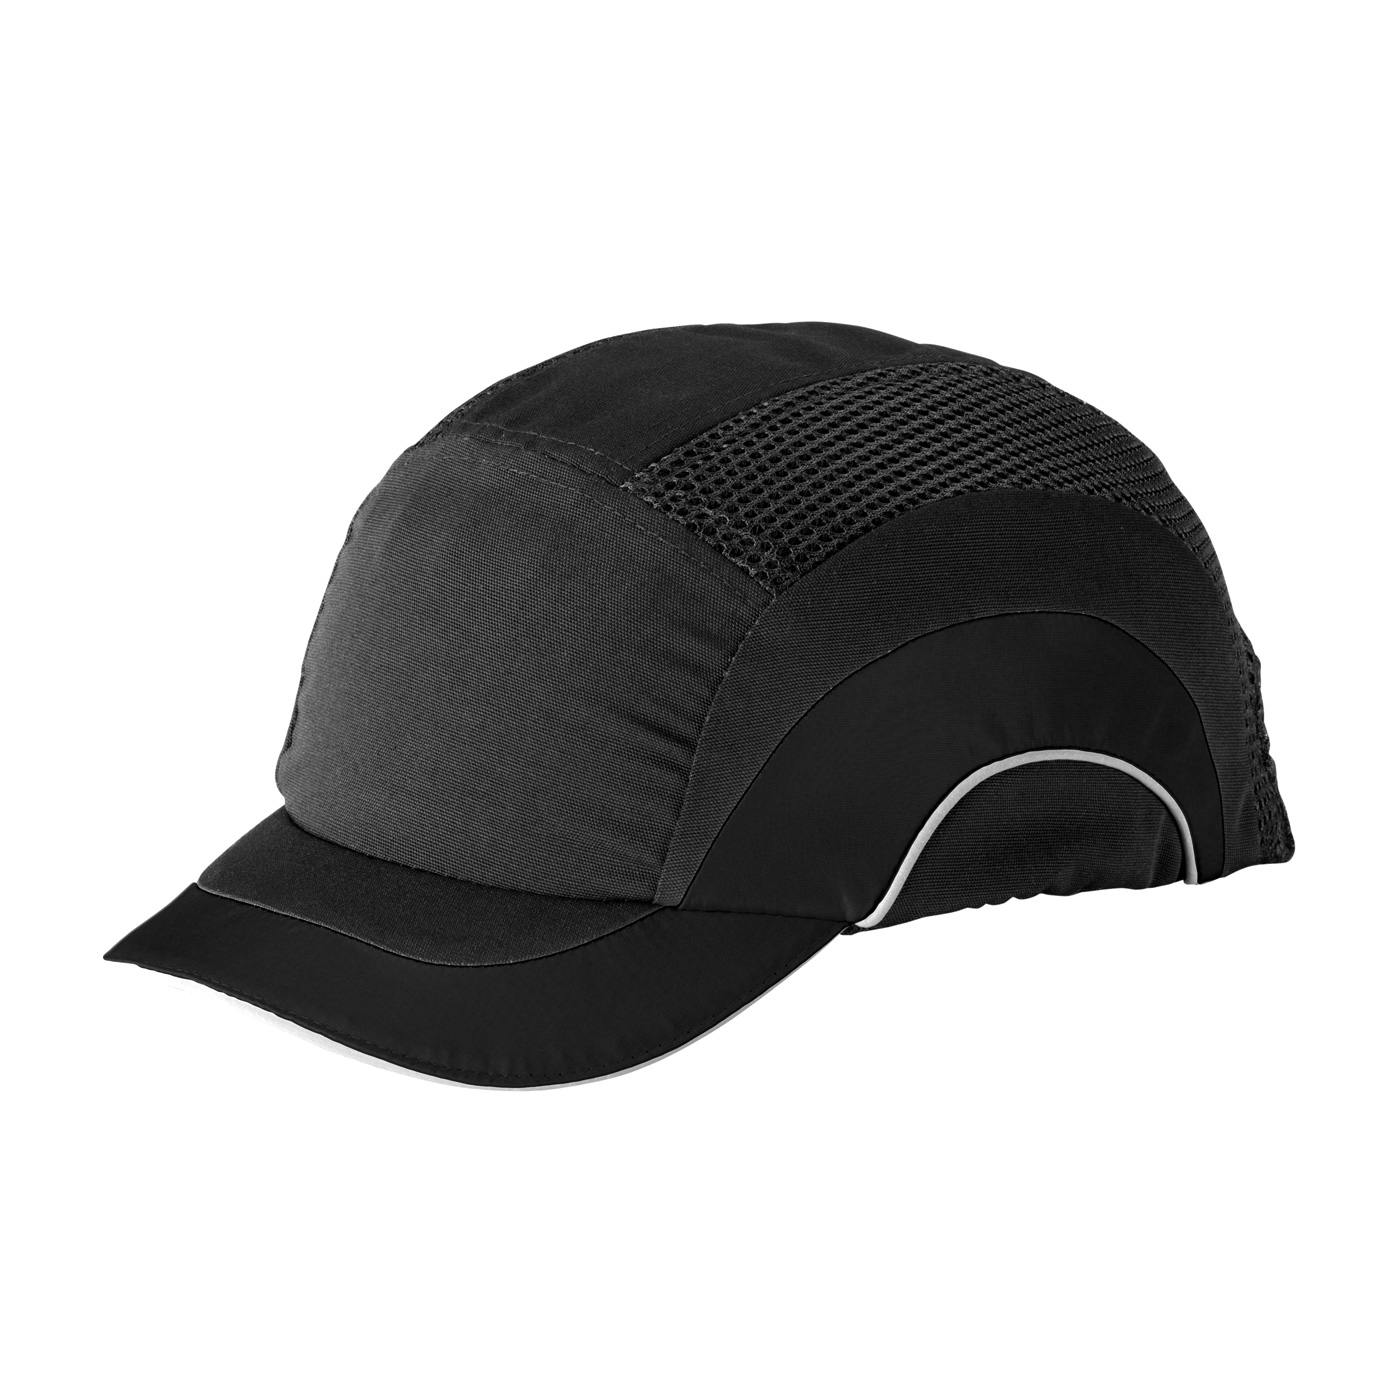 HardCap A1+™ Baseball Style Bump Cap with HDPE Protective Liner and Adjustable Back - Short Brim (282-ABS150)